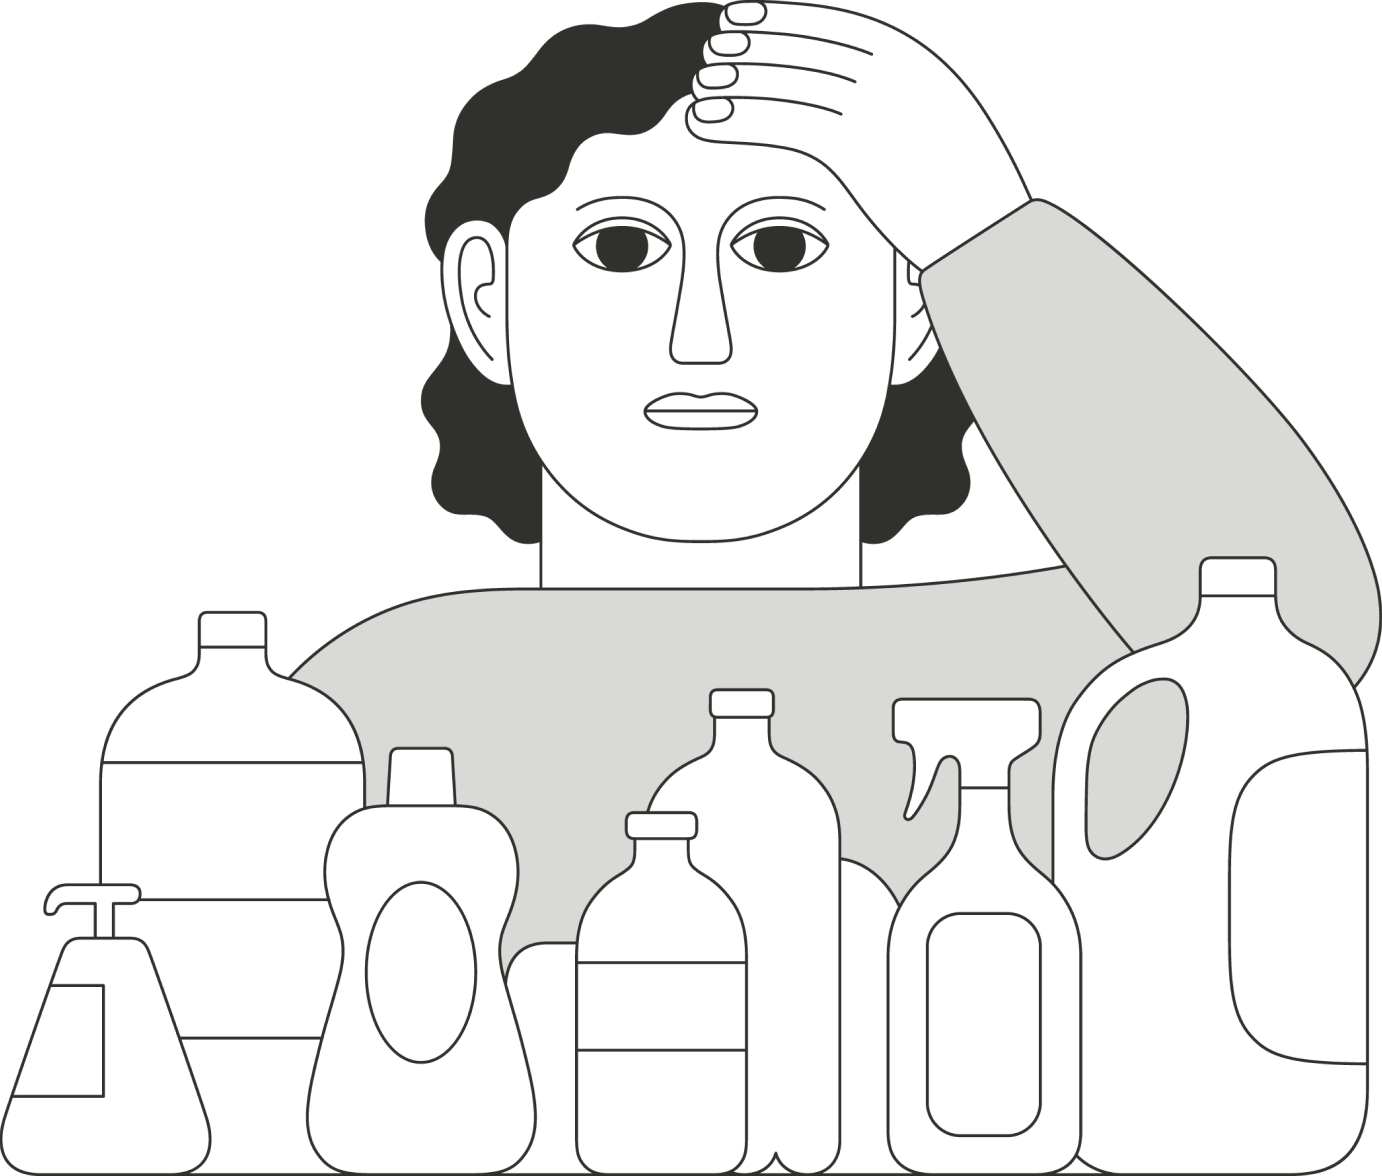 An illustration of a person in front of household products